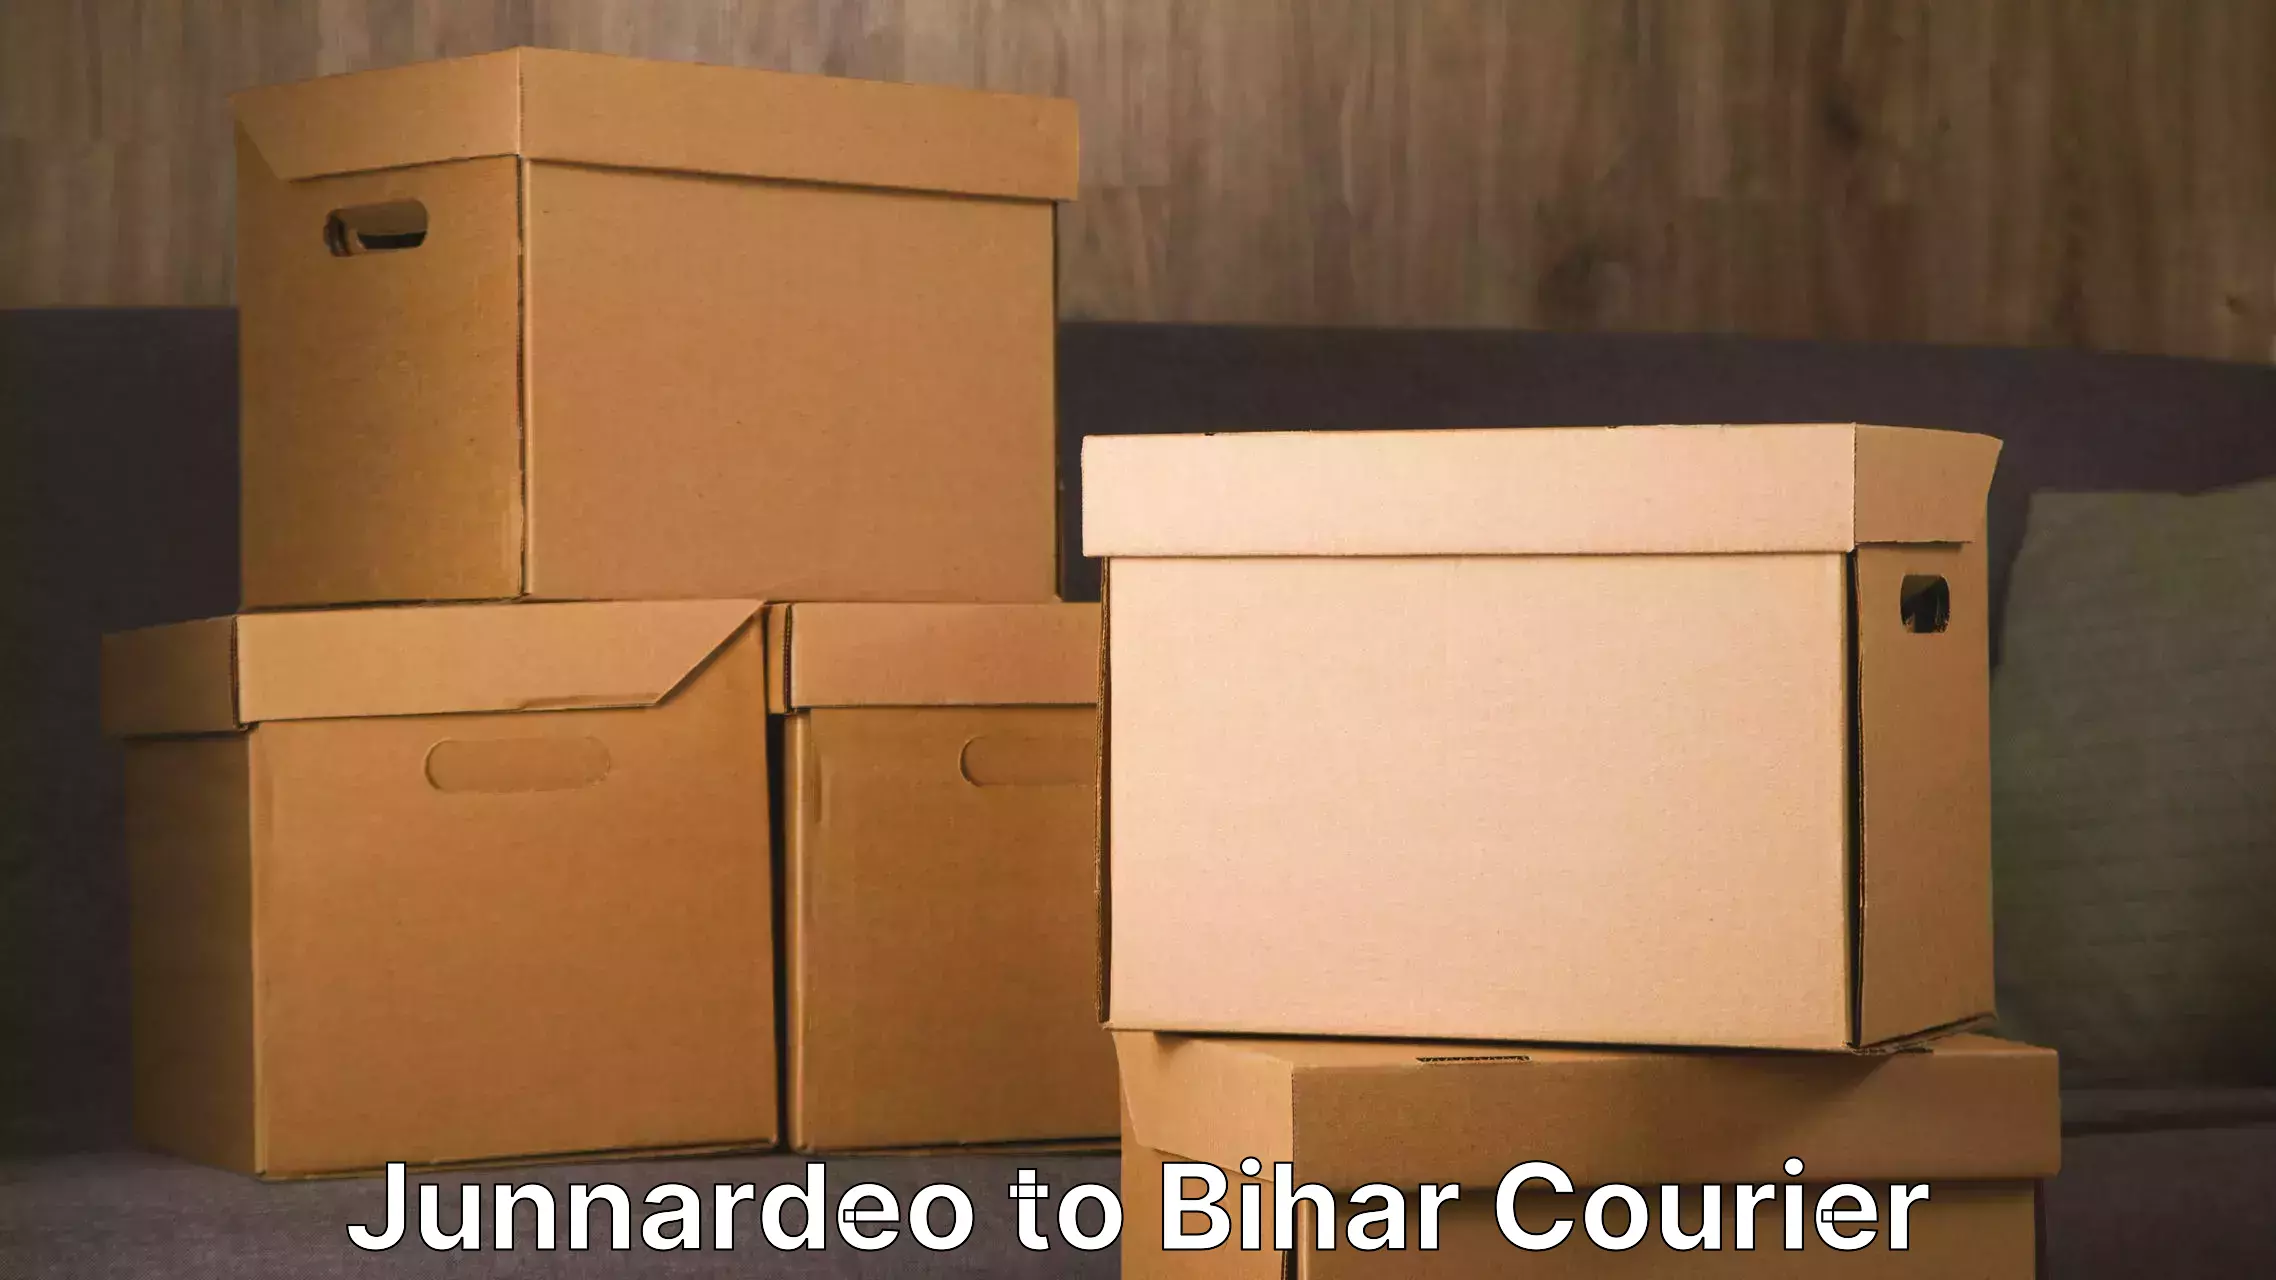 Skilled furniture movers Junnardeo to Bihar